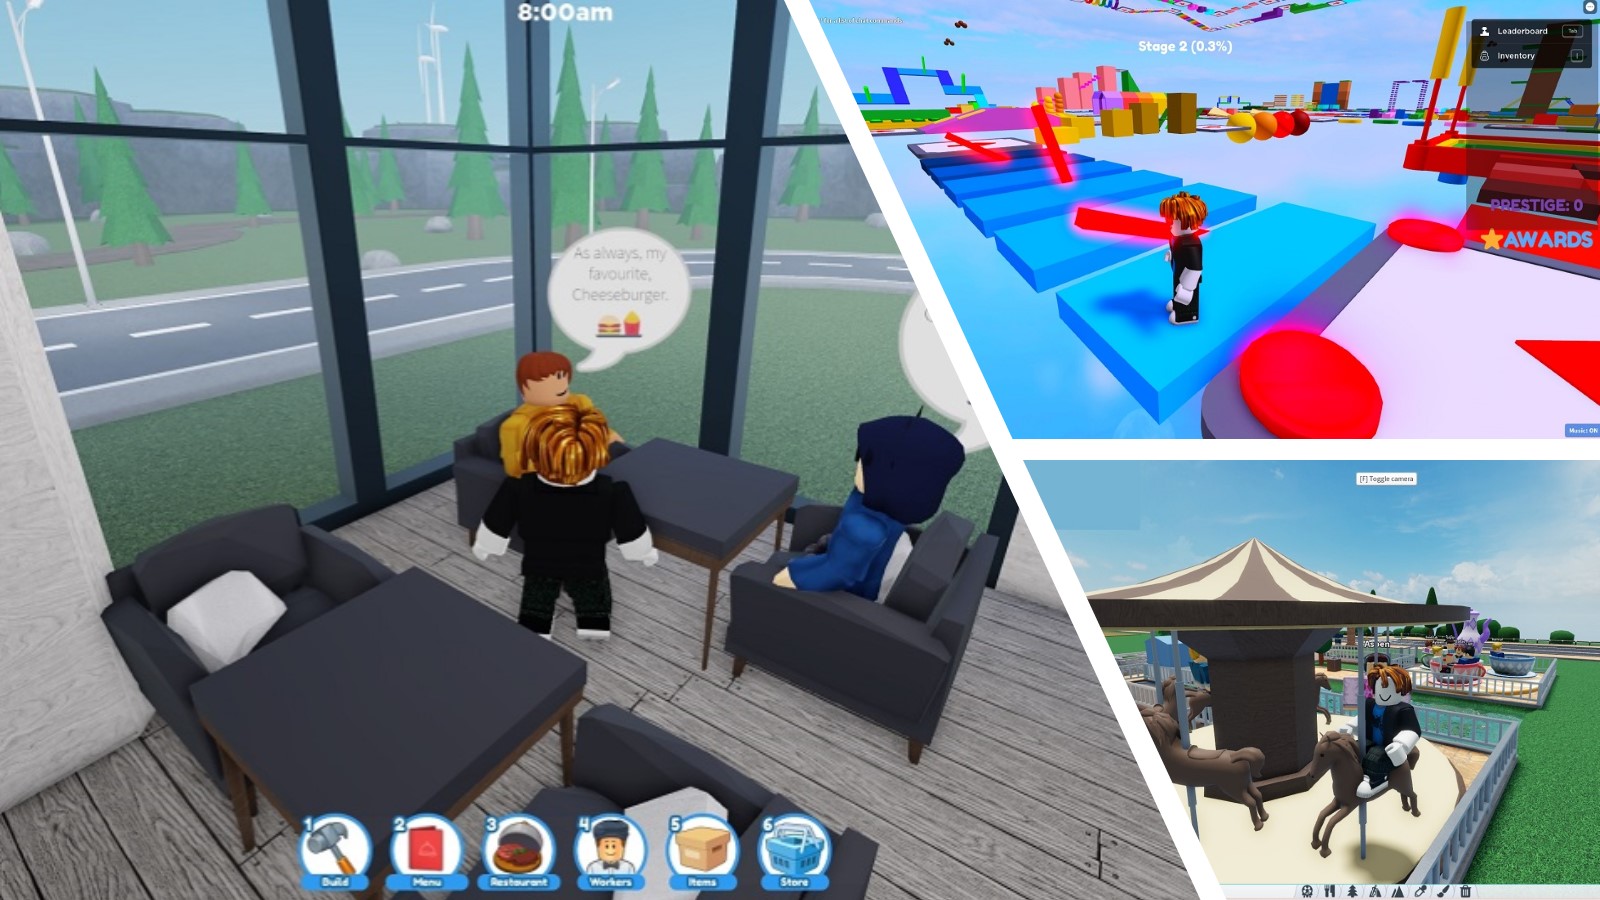 Free creative game building game, ROBLOX available now for Xbox One